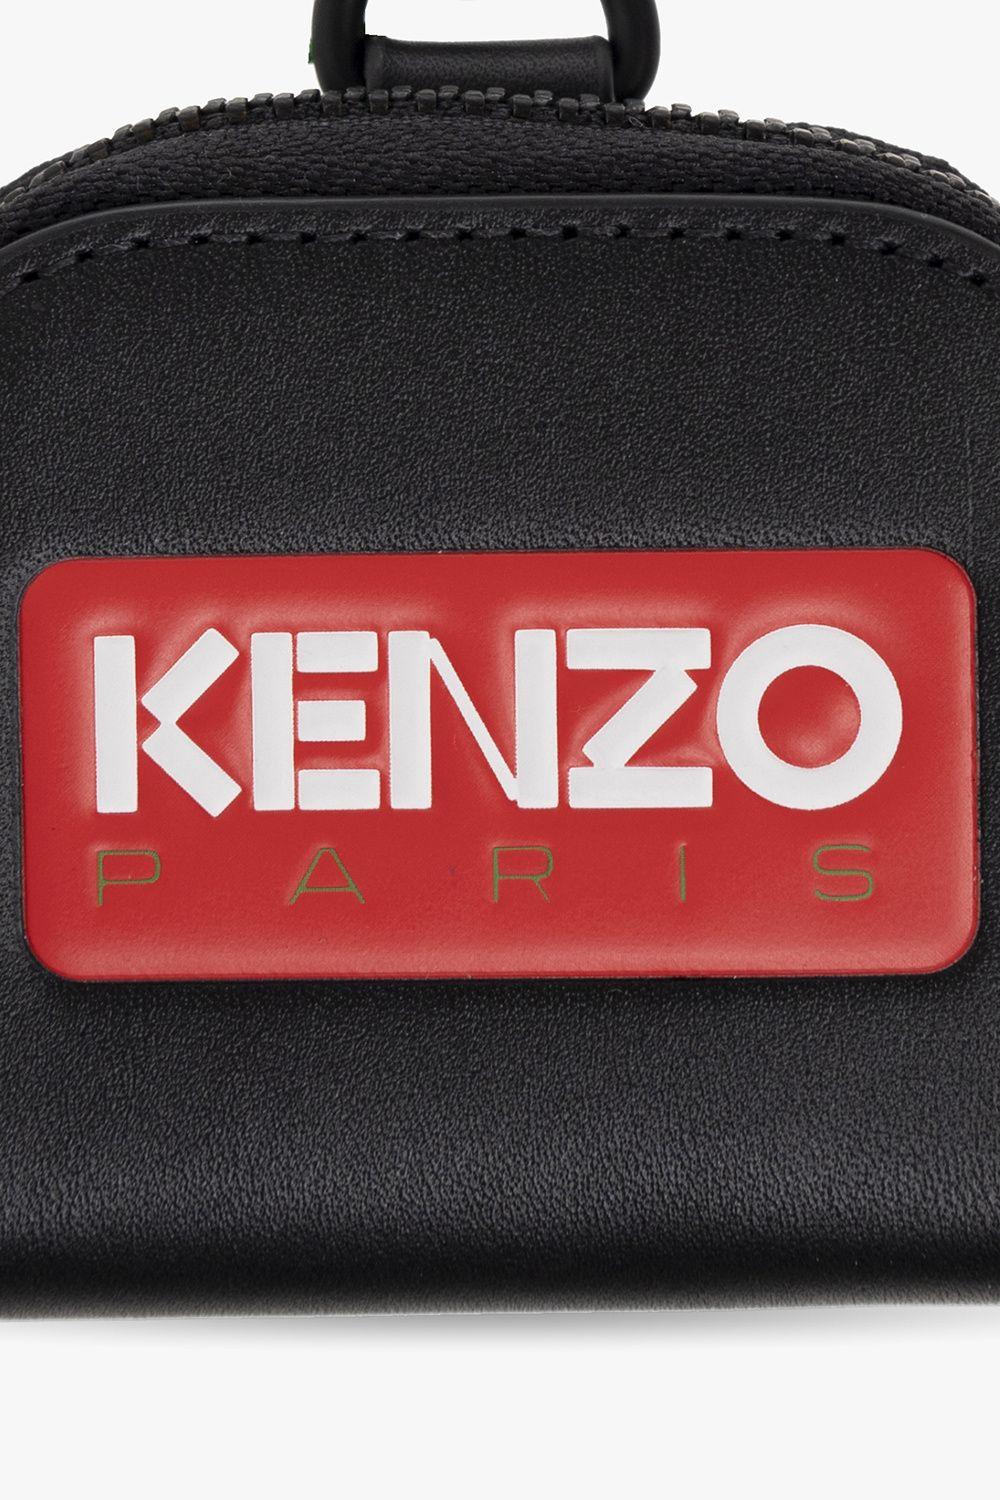 KENZO Airpods Case in Lyst